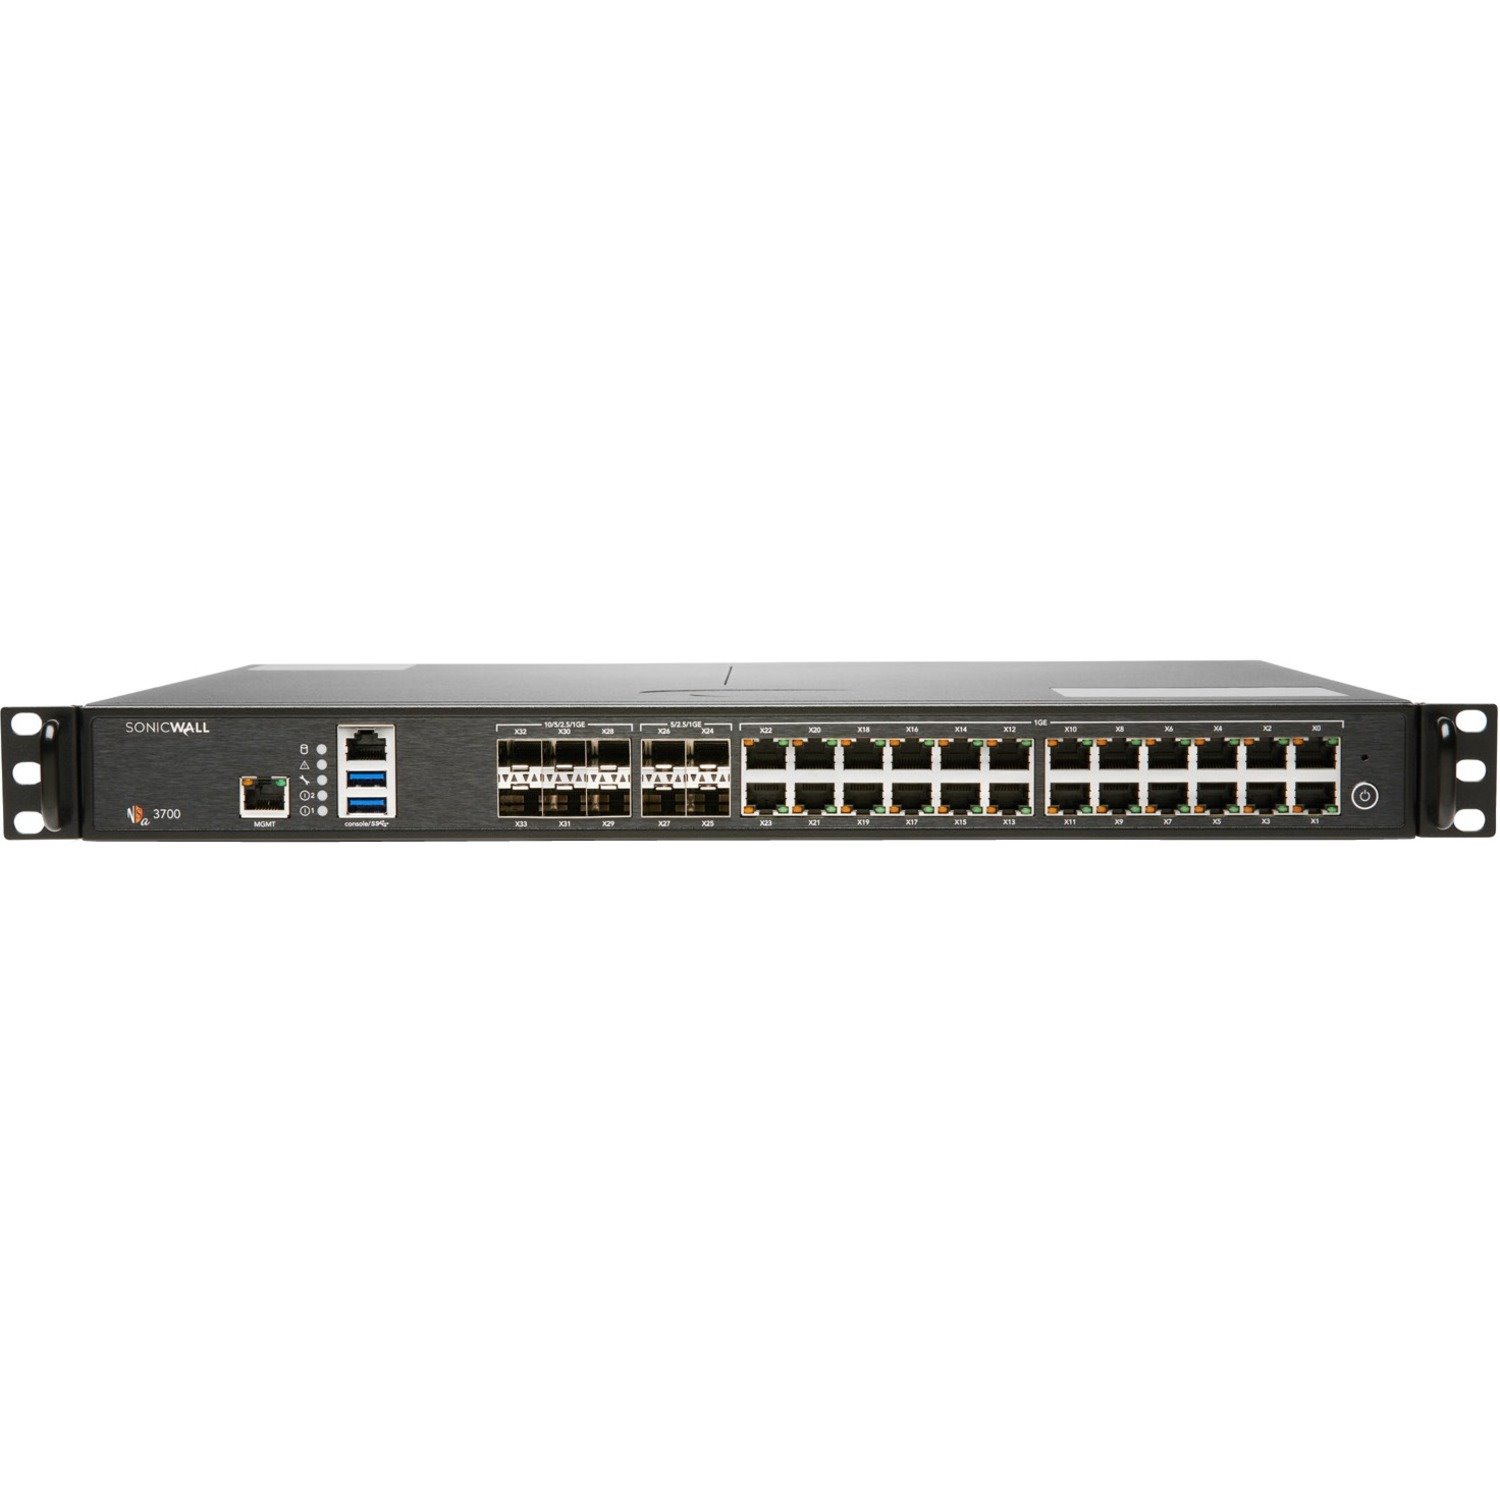 SonicWall 3700 Network Security/Firewall Appliance - 3 Year Secure Upgrade Plus Essential Edition